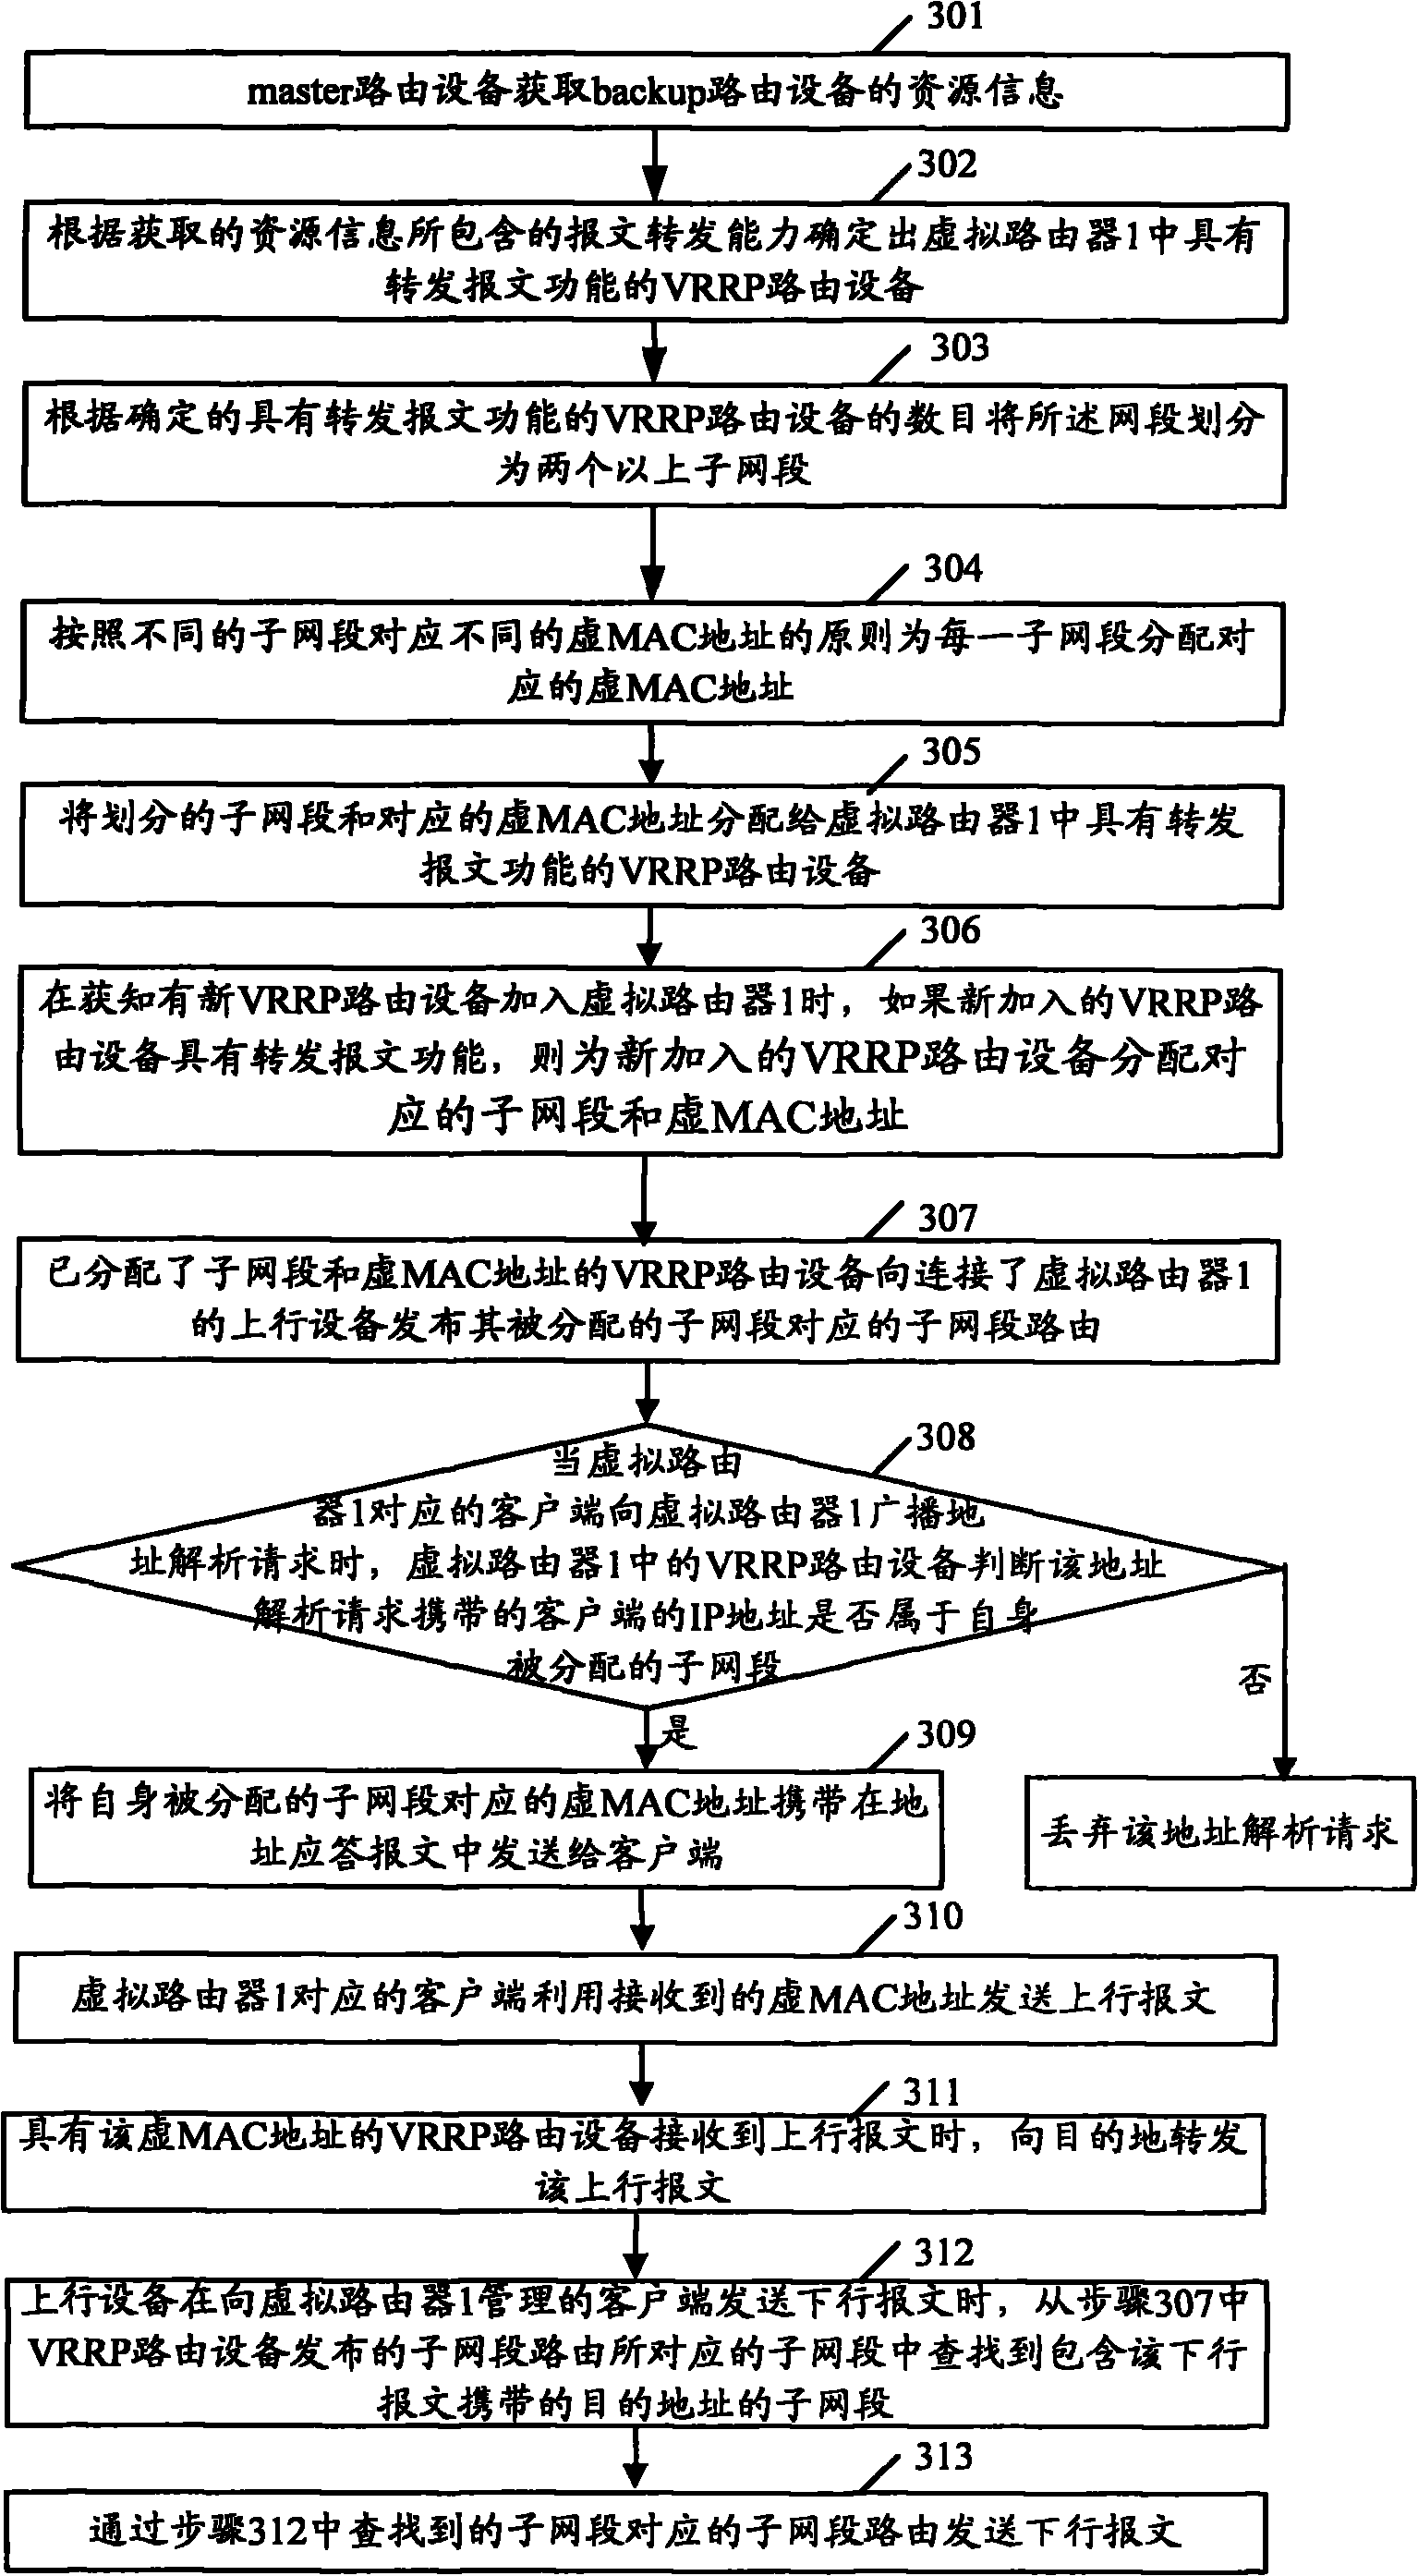 Method for realizing VRRP (Virtual Router Redundancy Protocol) flow transmission and routing equipment